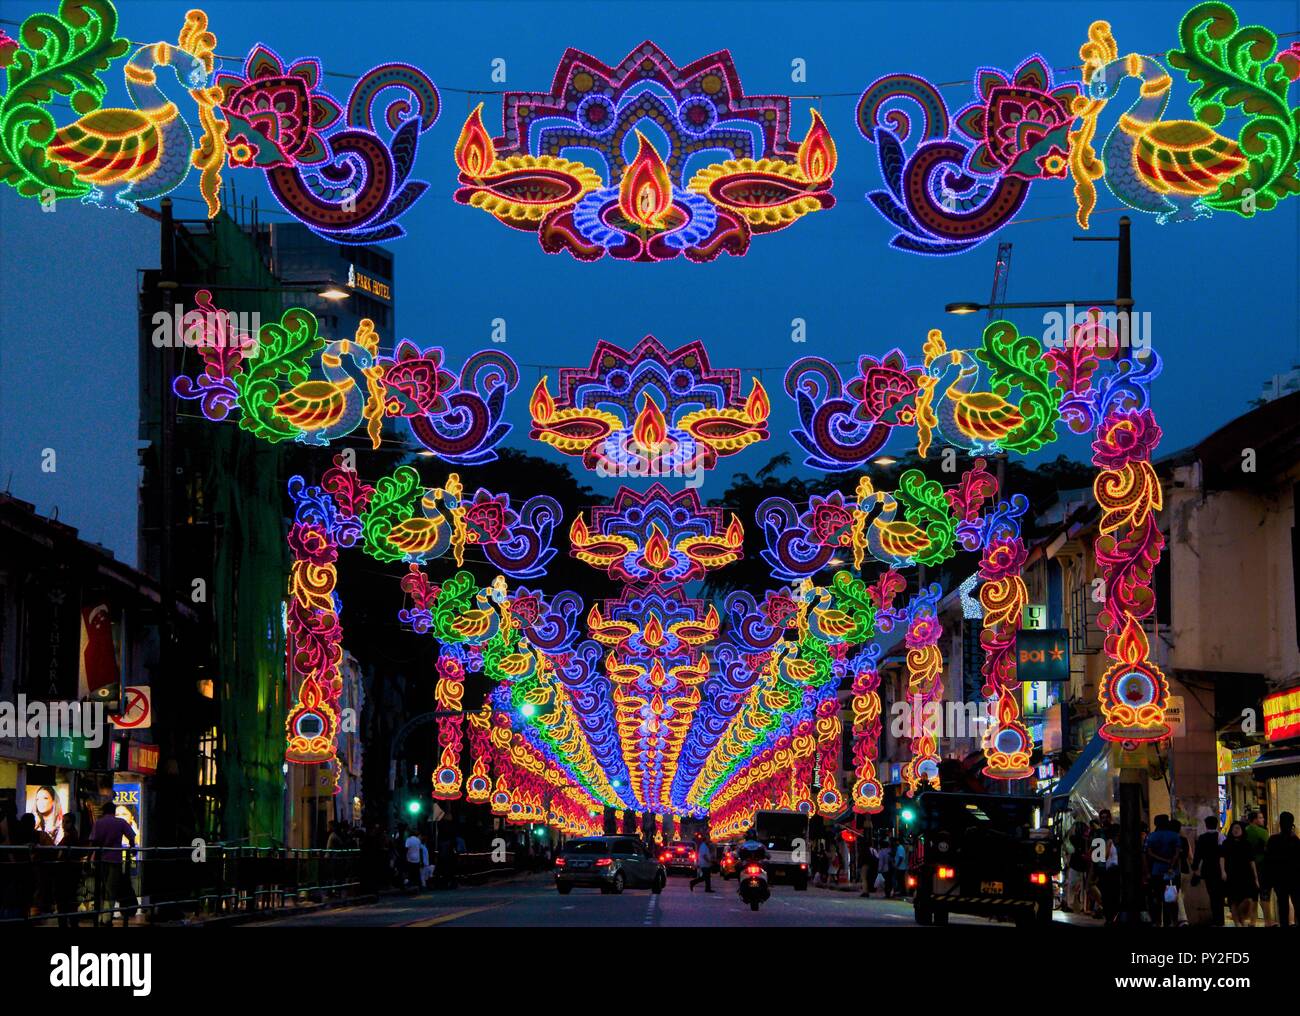 Colourful street lights and decorations celebrating Diwali or Deepavali festival of lights in Little India, Singapore during blue hour Stock Photo